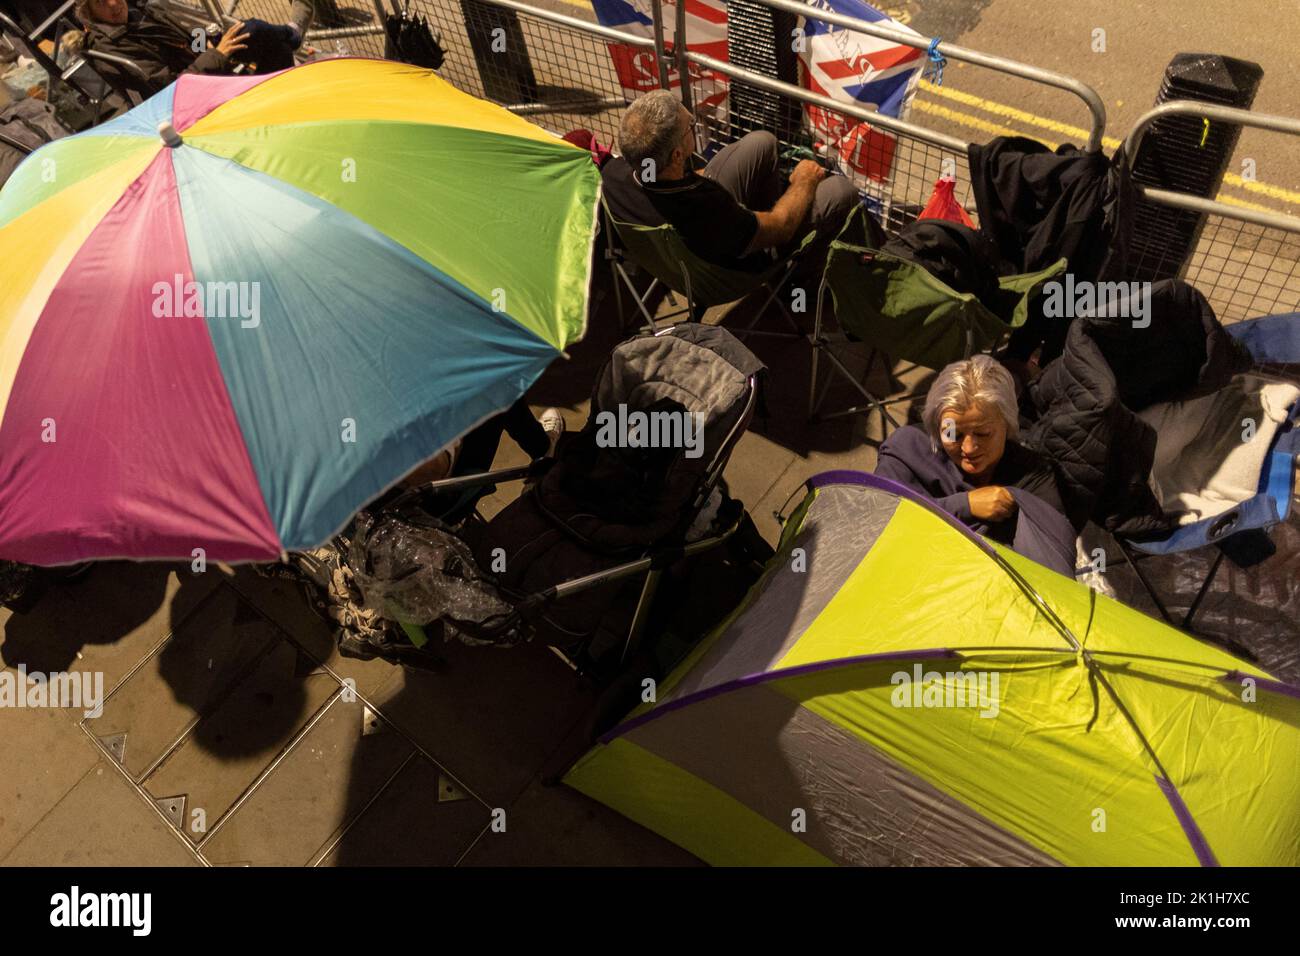 People camp outside of the Houses of Parliament ahead of the state funeral of Britain's Queen Elizabeth, in London, Britain, September 18, 2022. REUTERS/Carlos Barria Stock Photo